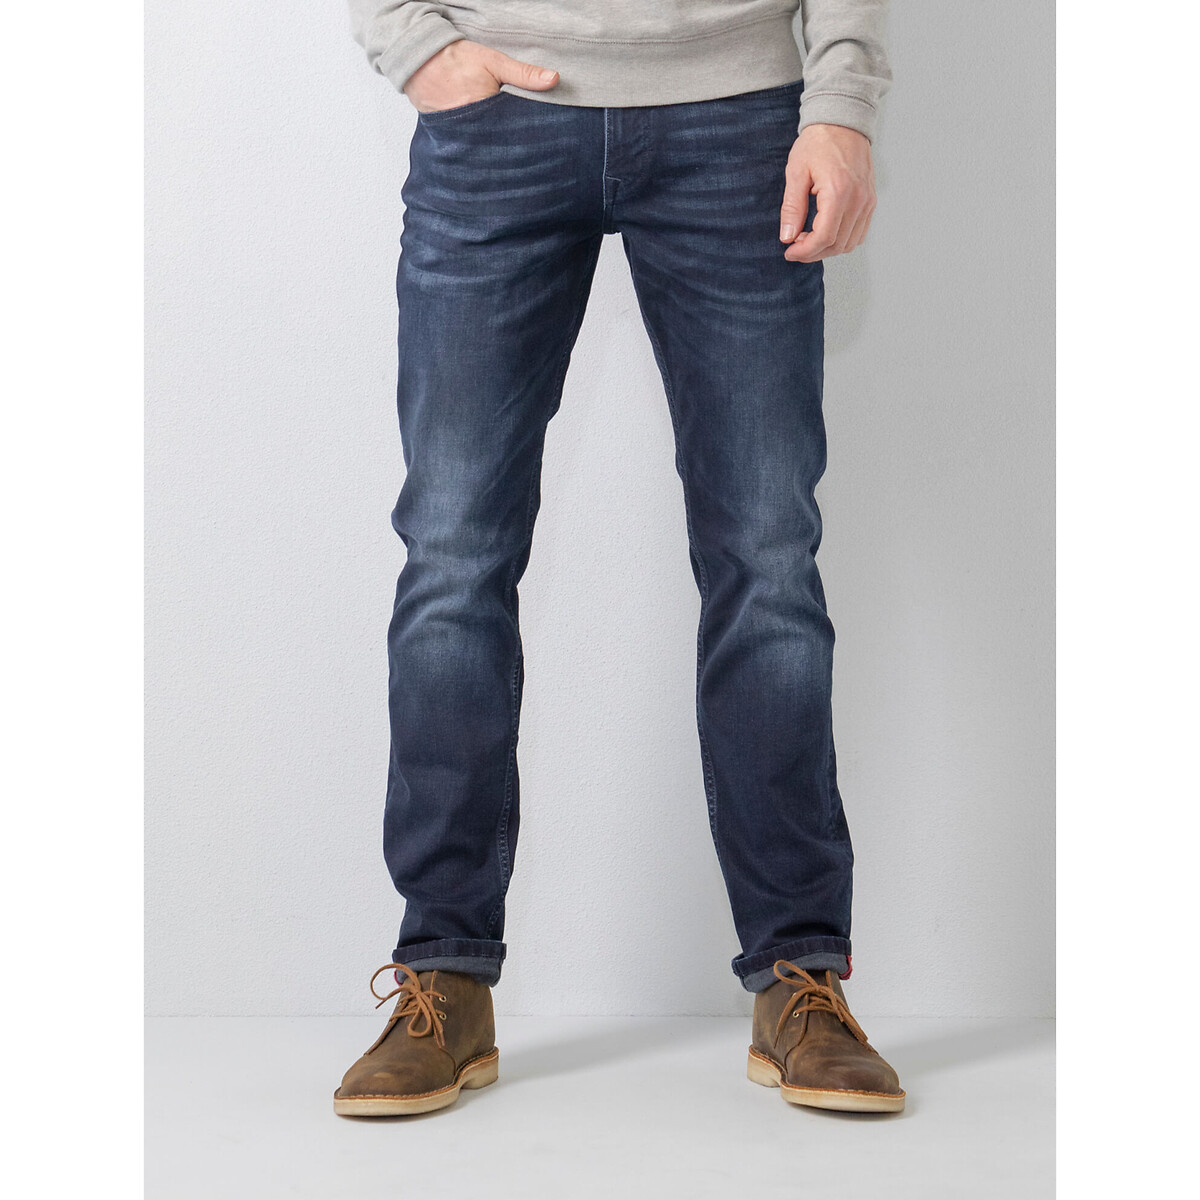 Redoute straight stretch jeans, rise | Russel Petrol mid Industries La